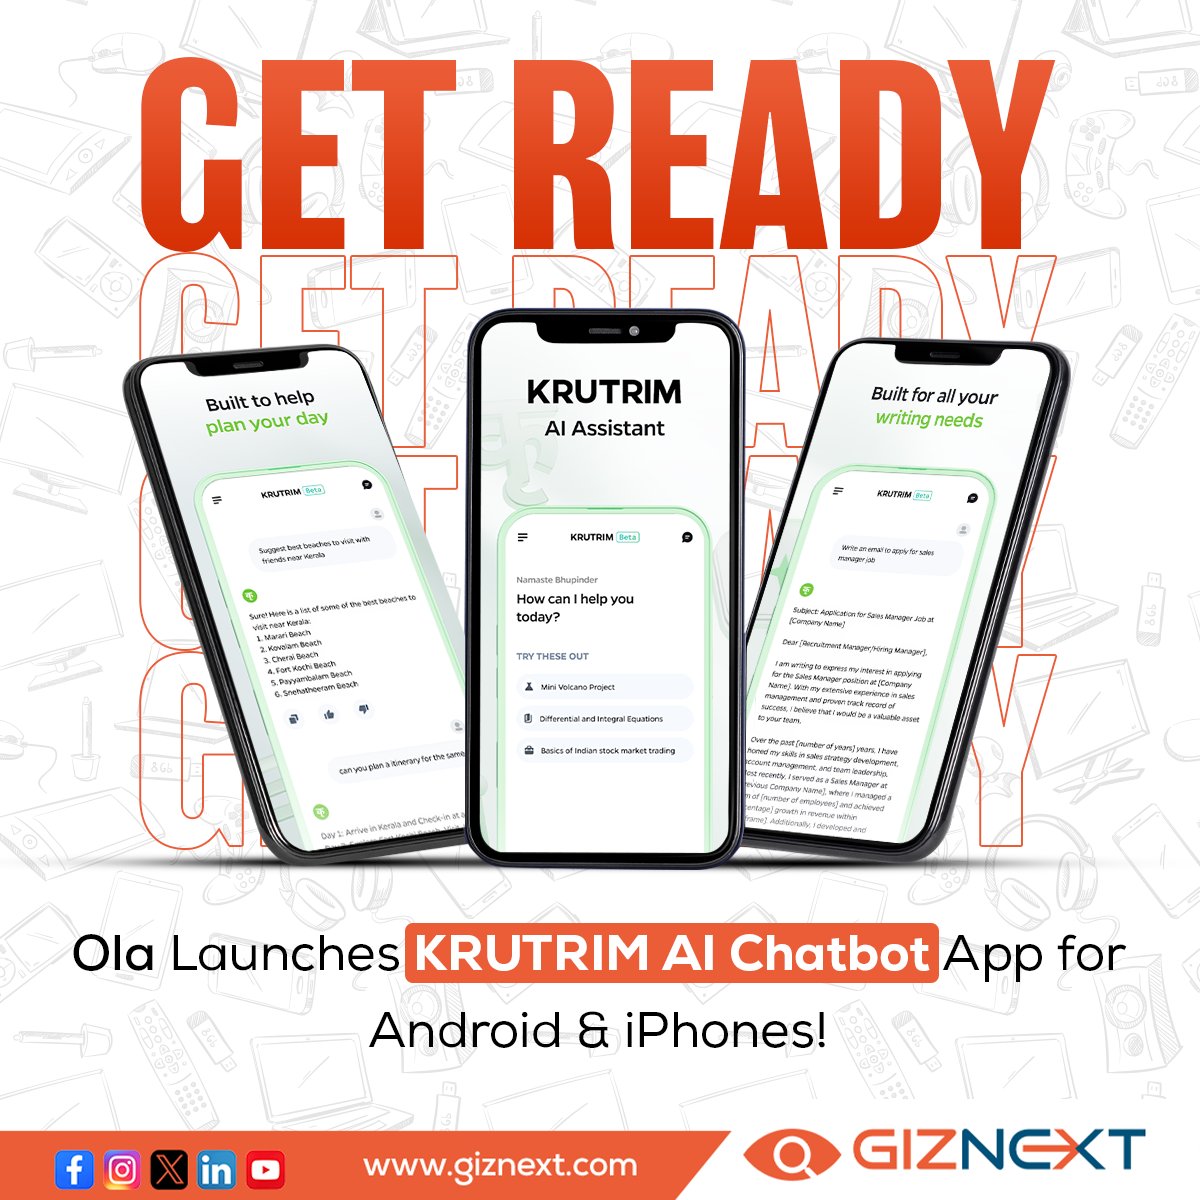 Big news from Ola Krutrim! 🤩 Their cloud platform is now open, providing AI infrastructure and models for innovation. Create your own products with their new mobile app! 🌟 . . . #olakrutrim #aiassistant #aichatbox #technews #giznext